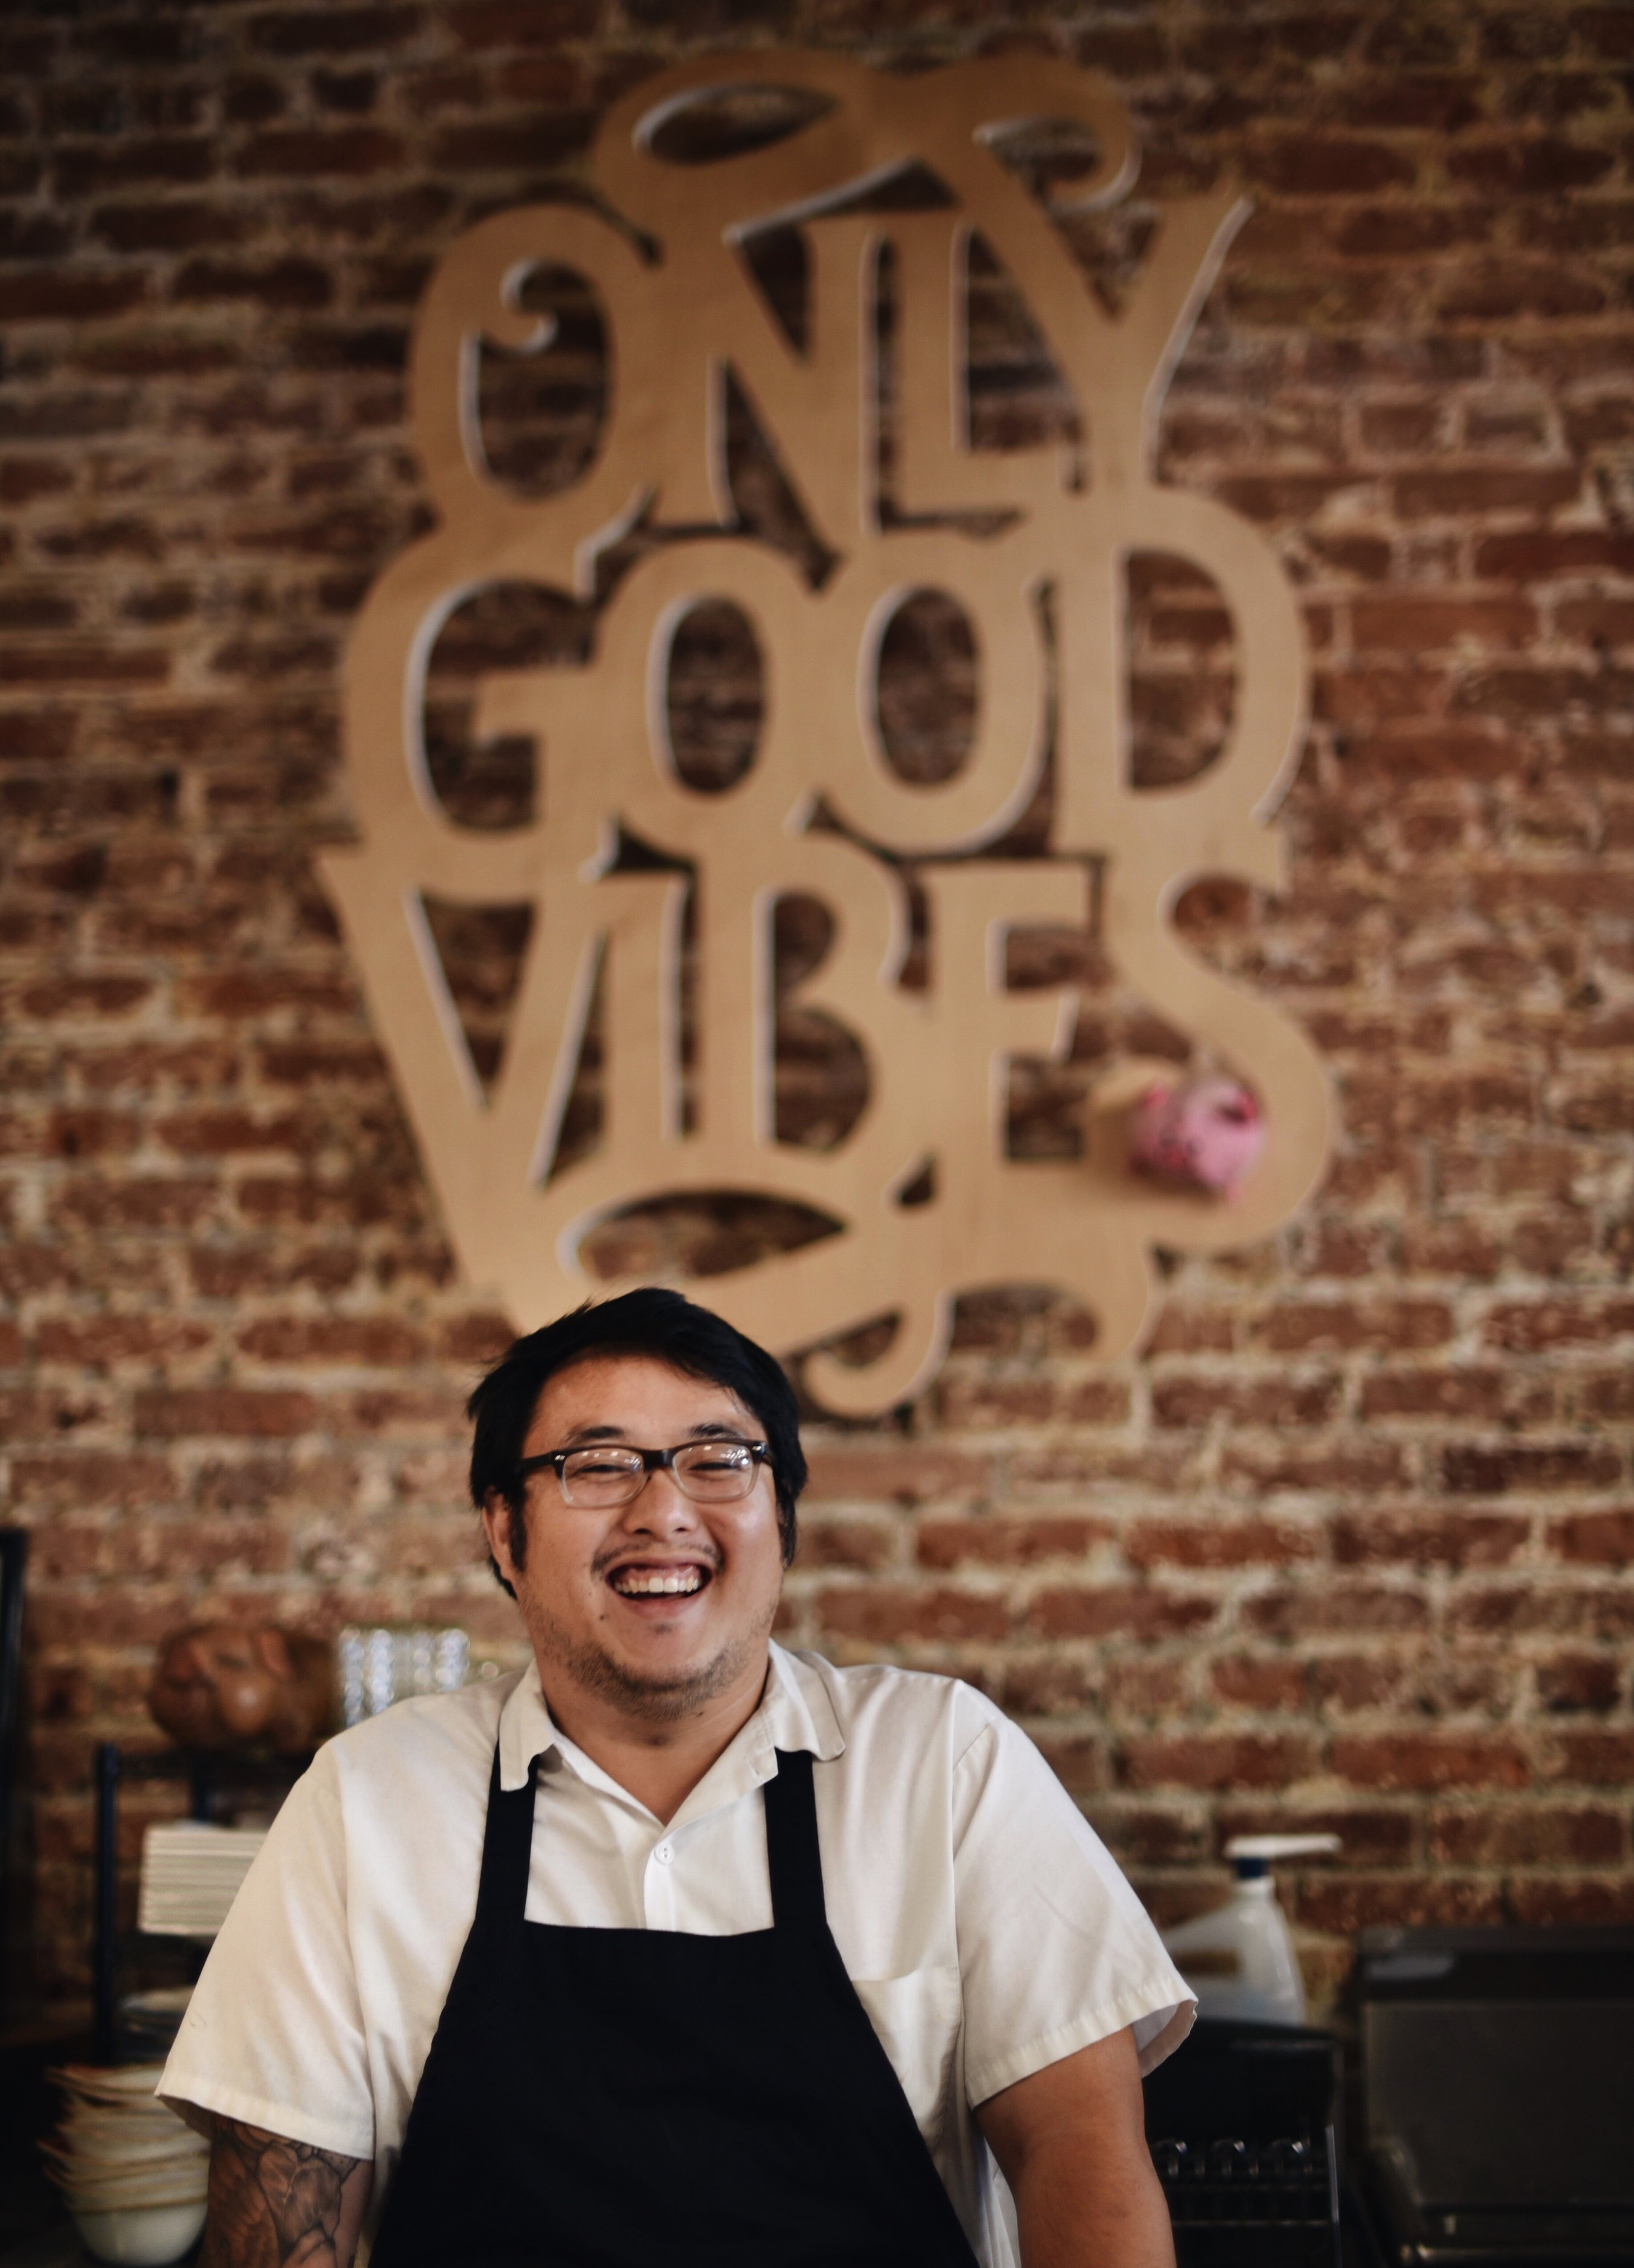  Le brings serious credentials to his craft having studied at America’s premier culinary school and cooked under classically trained French chefs. But the food is his own. It’s about the places and people he experienced.    Photos courtesy The Pig an